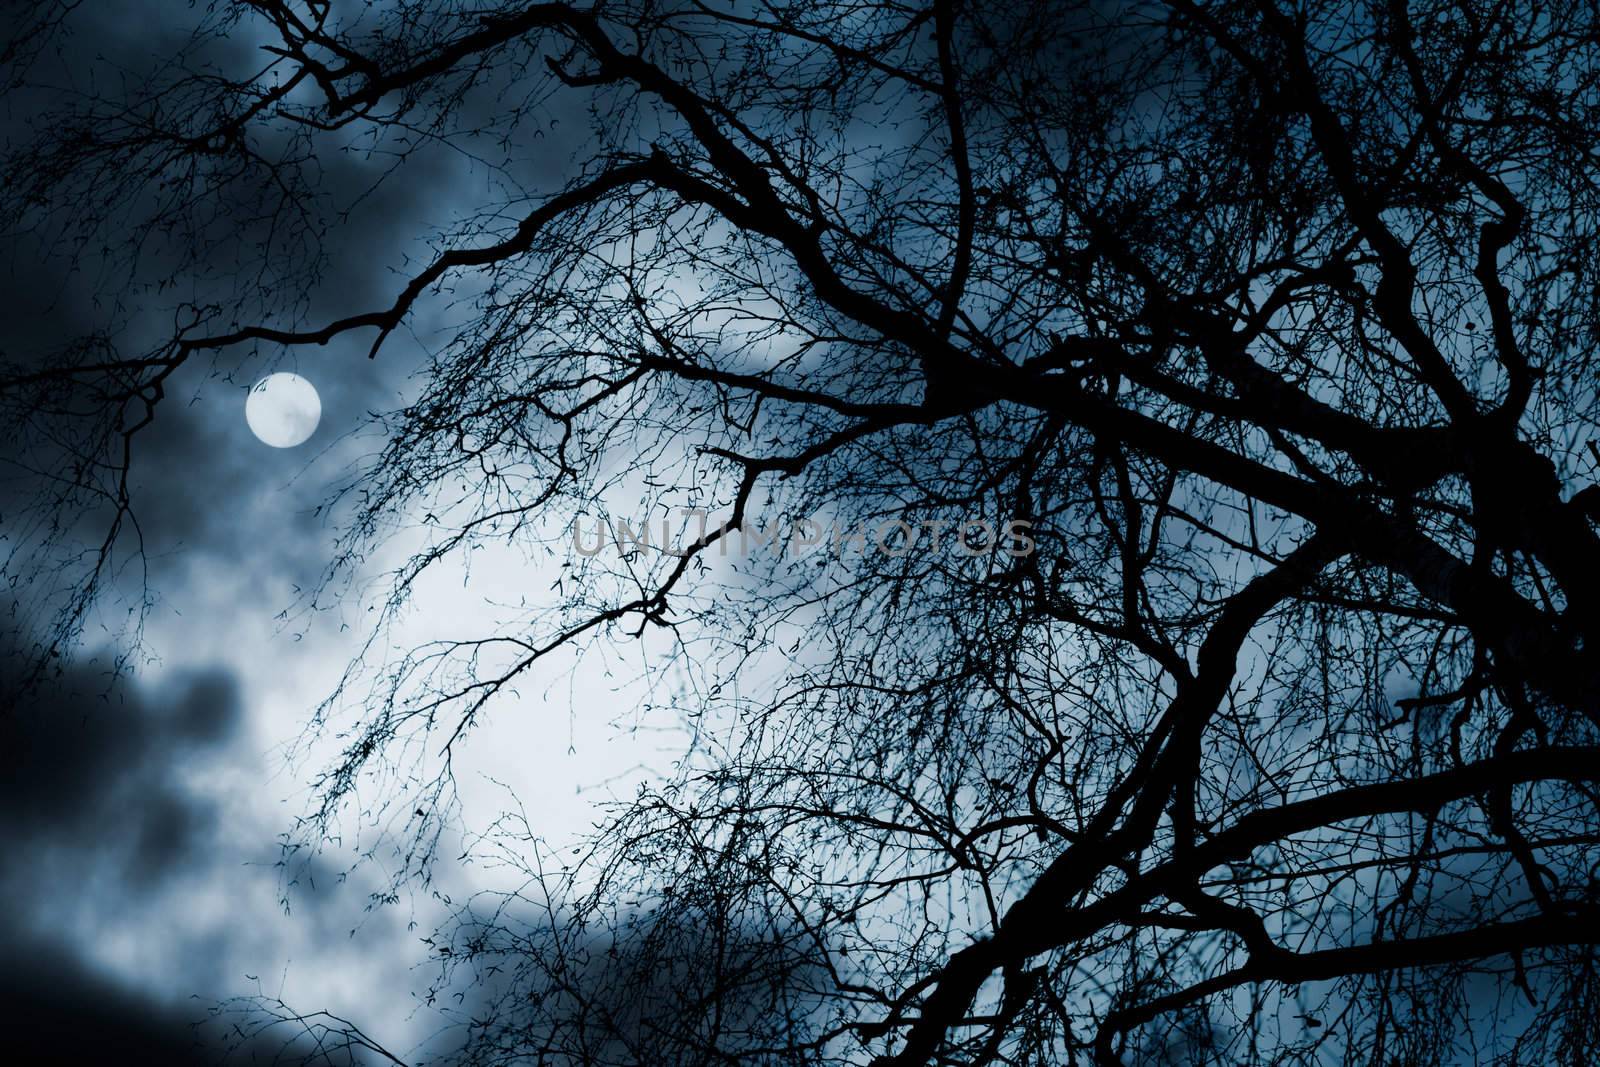 Scary dark scenery with naked trees, full moon and clouds by pashabo